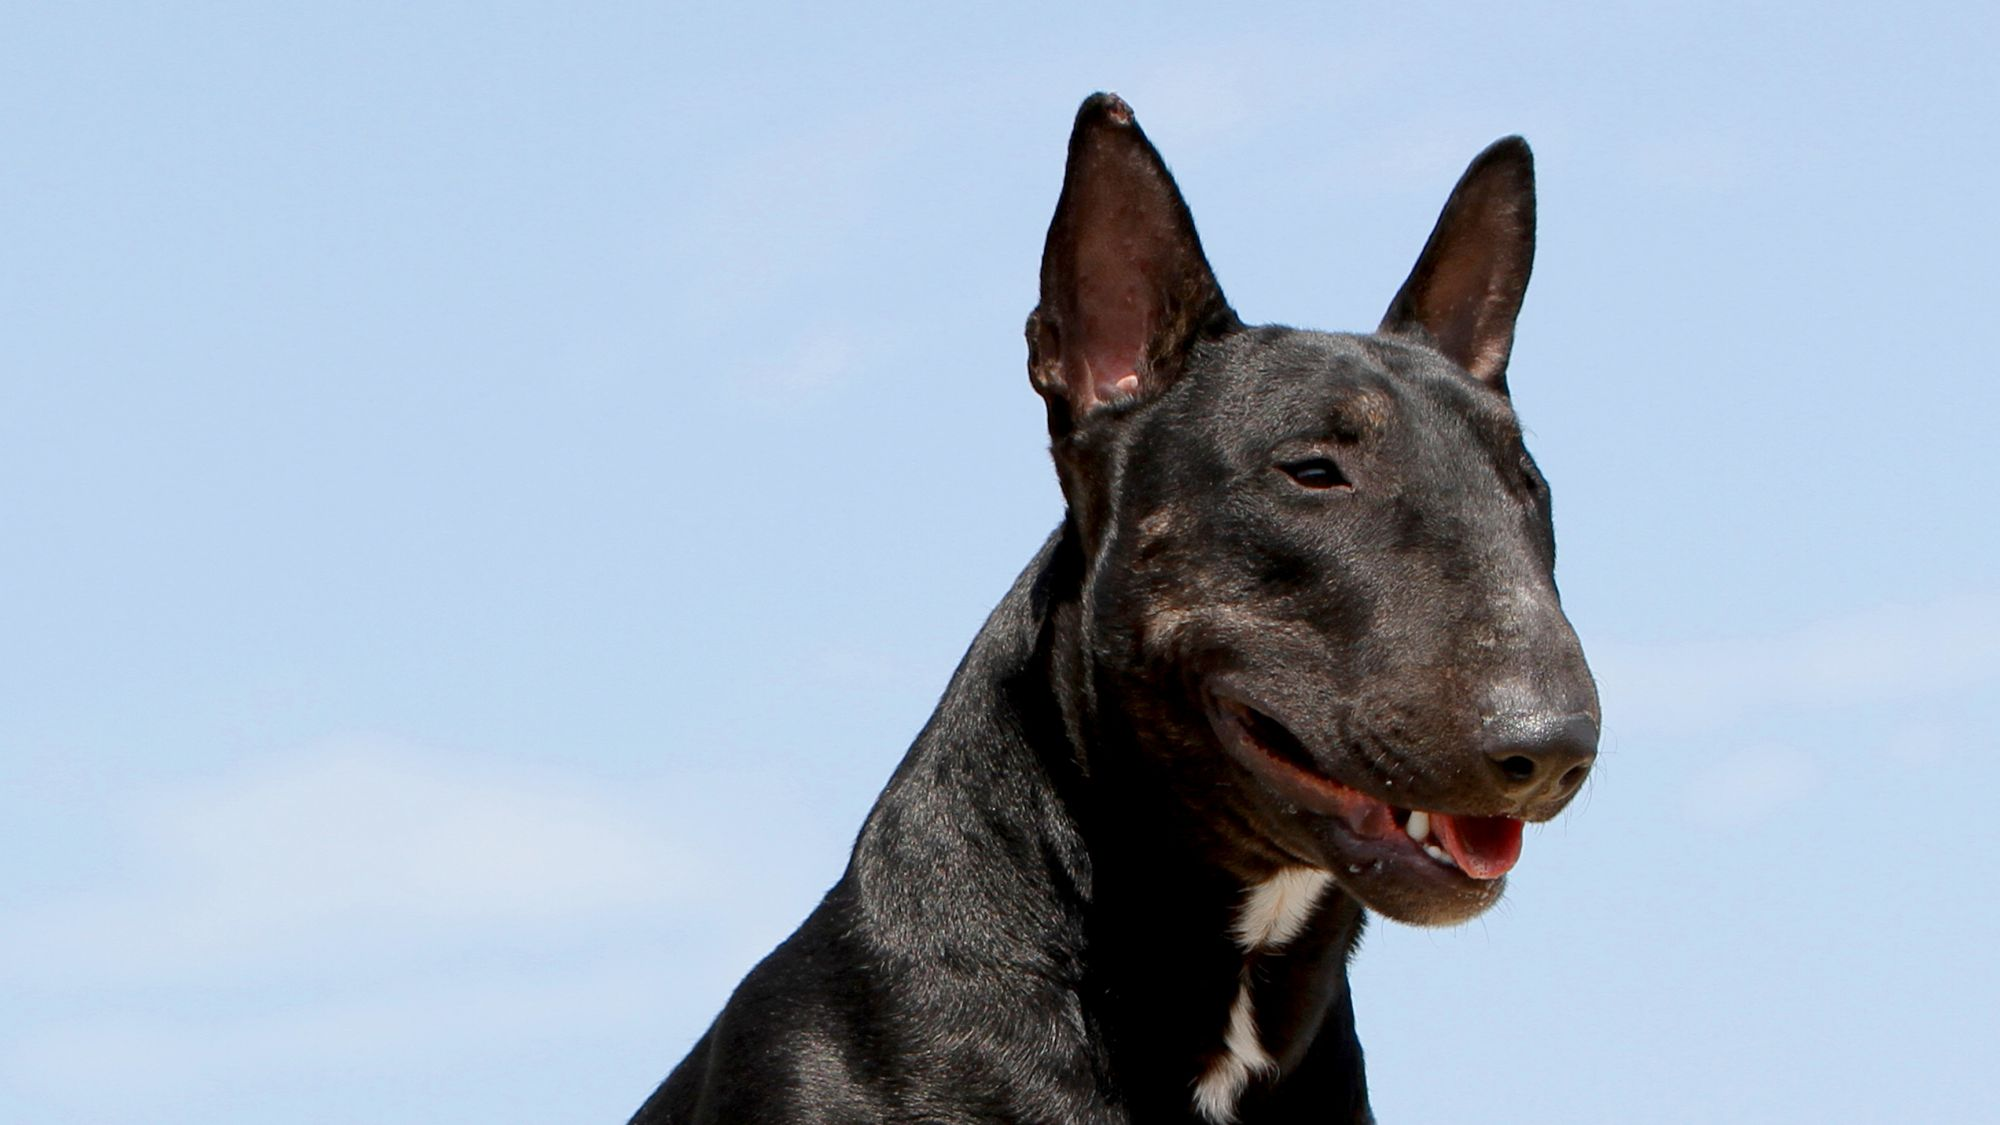 Bull Terrier stood on a rock looking into the distance